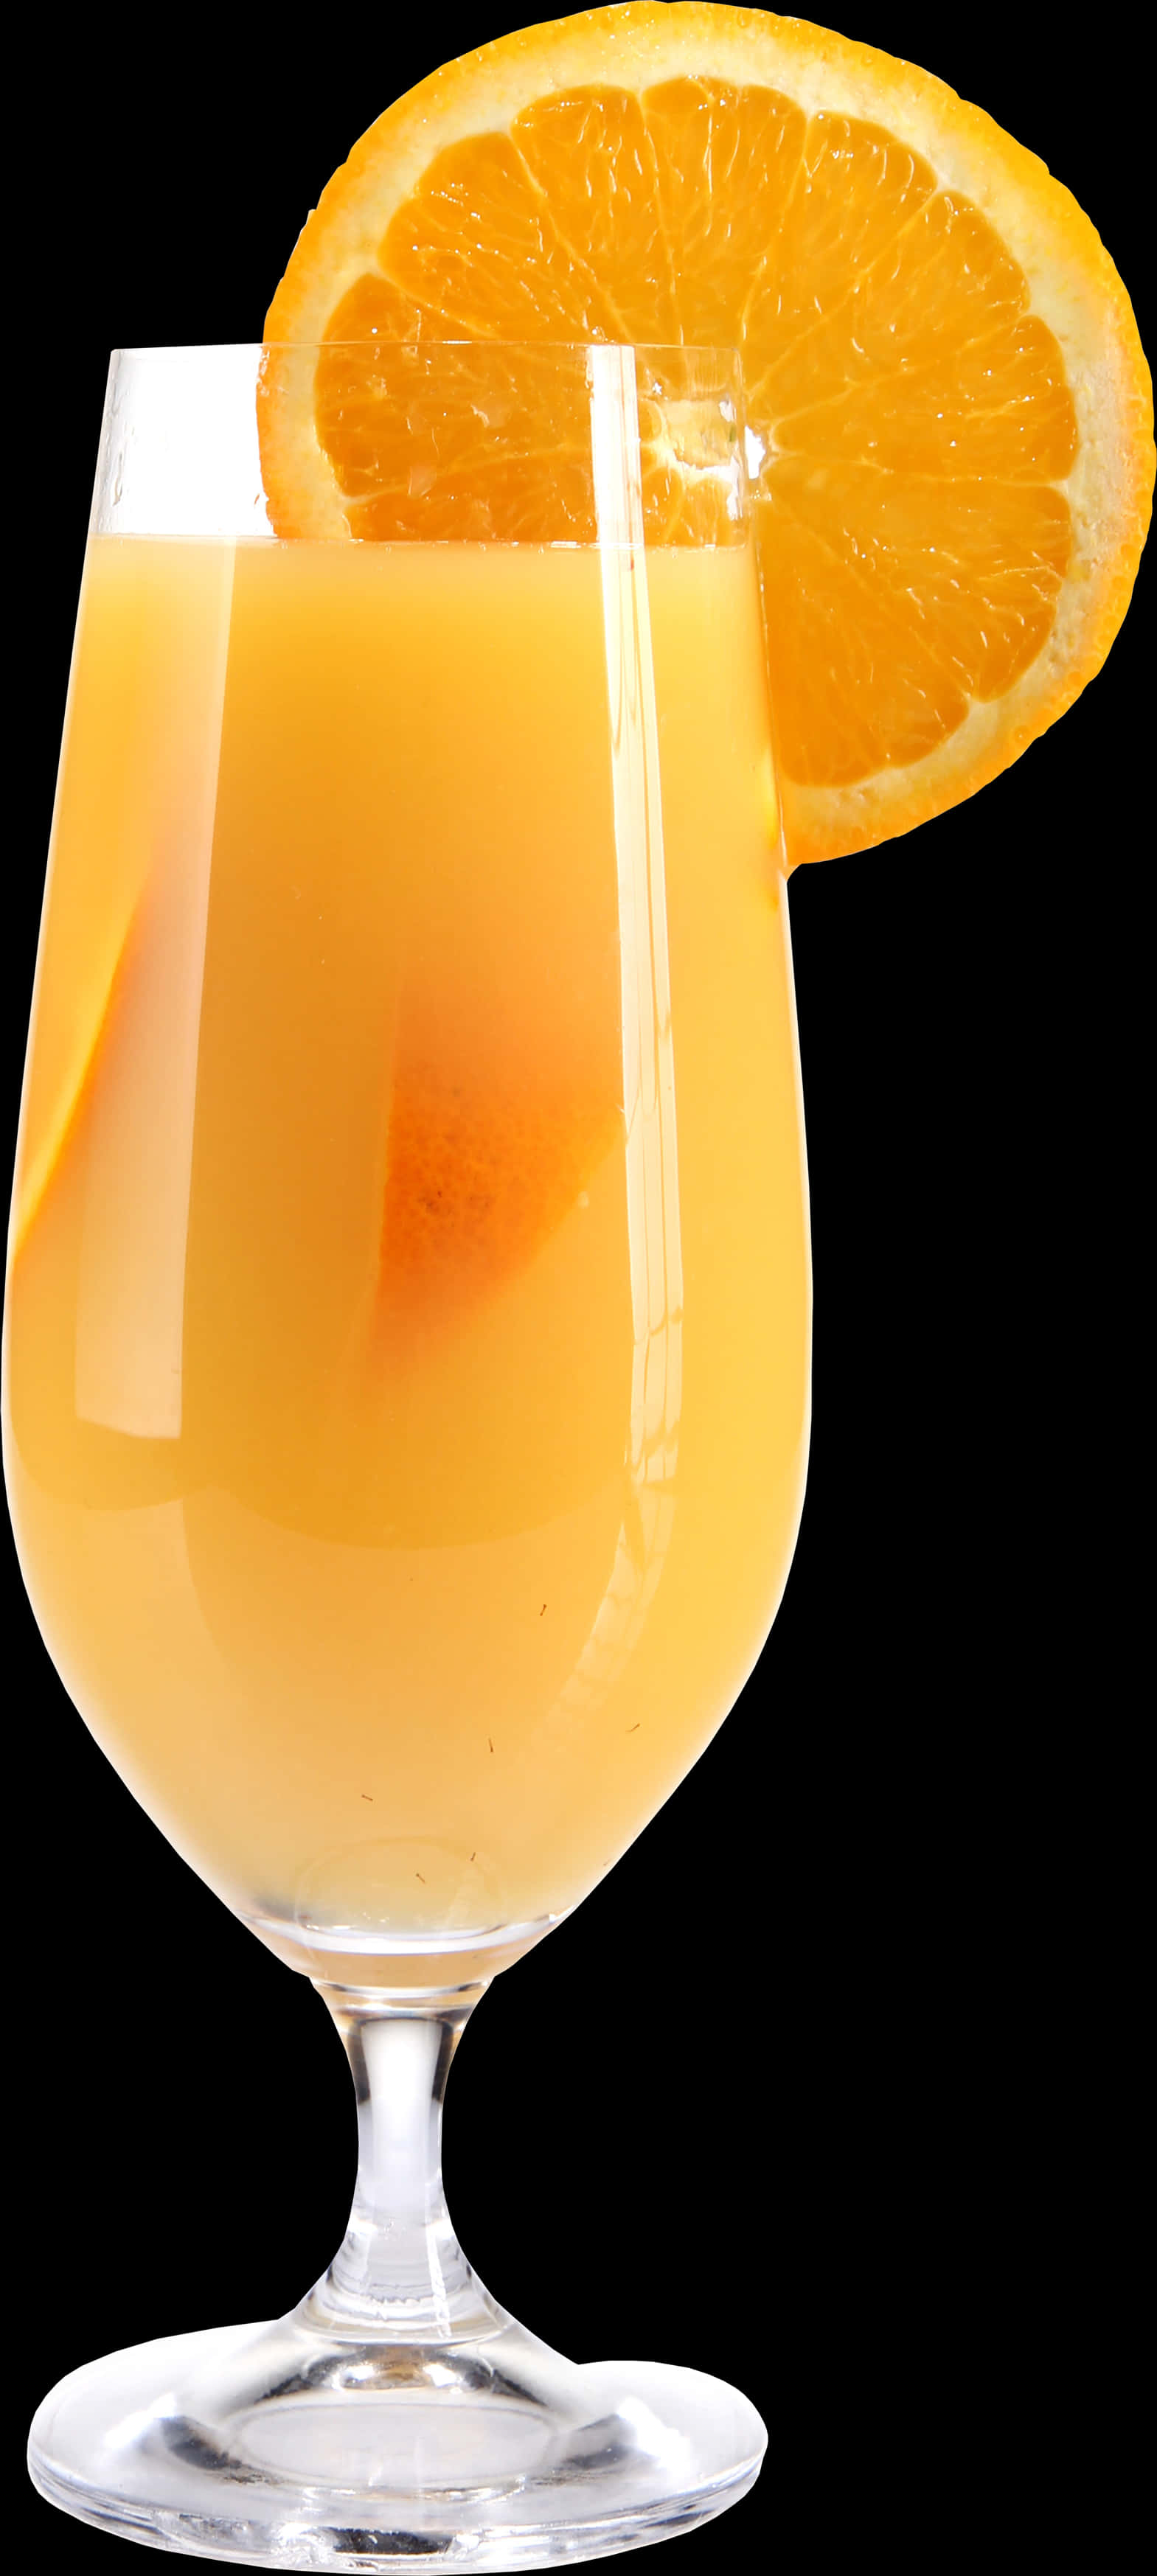 A Glass With Orange Juice And A Slice Of Orange